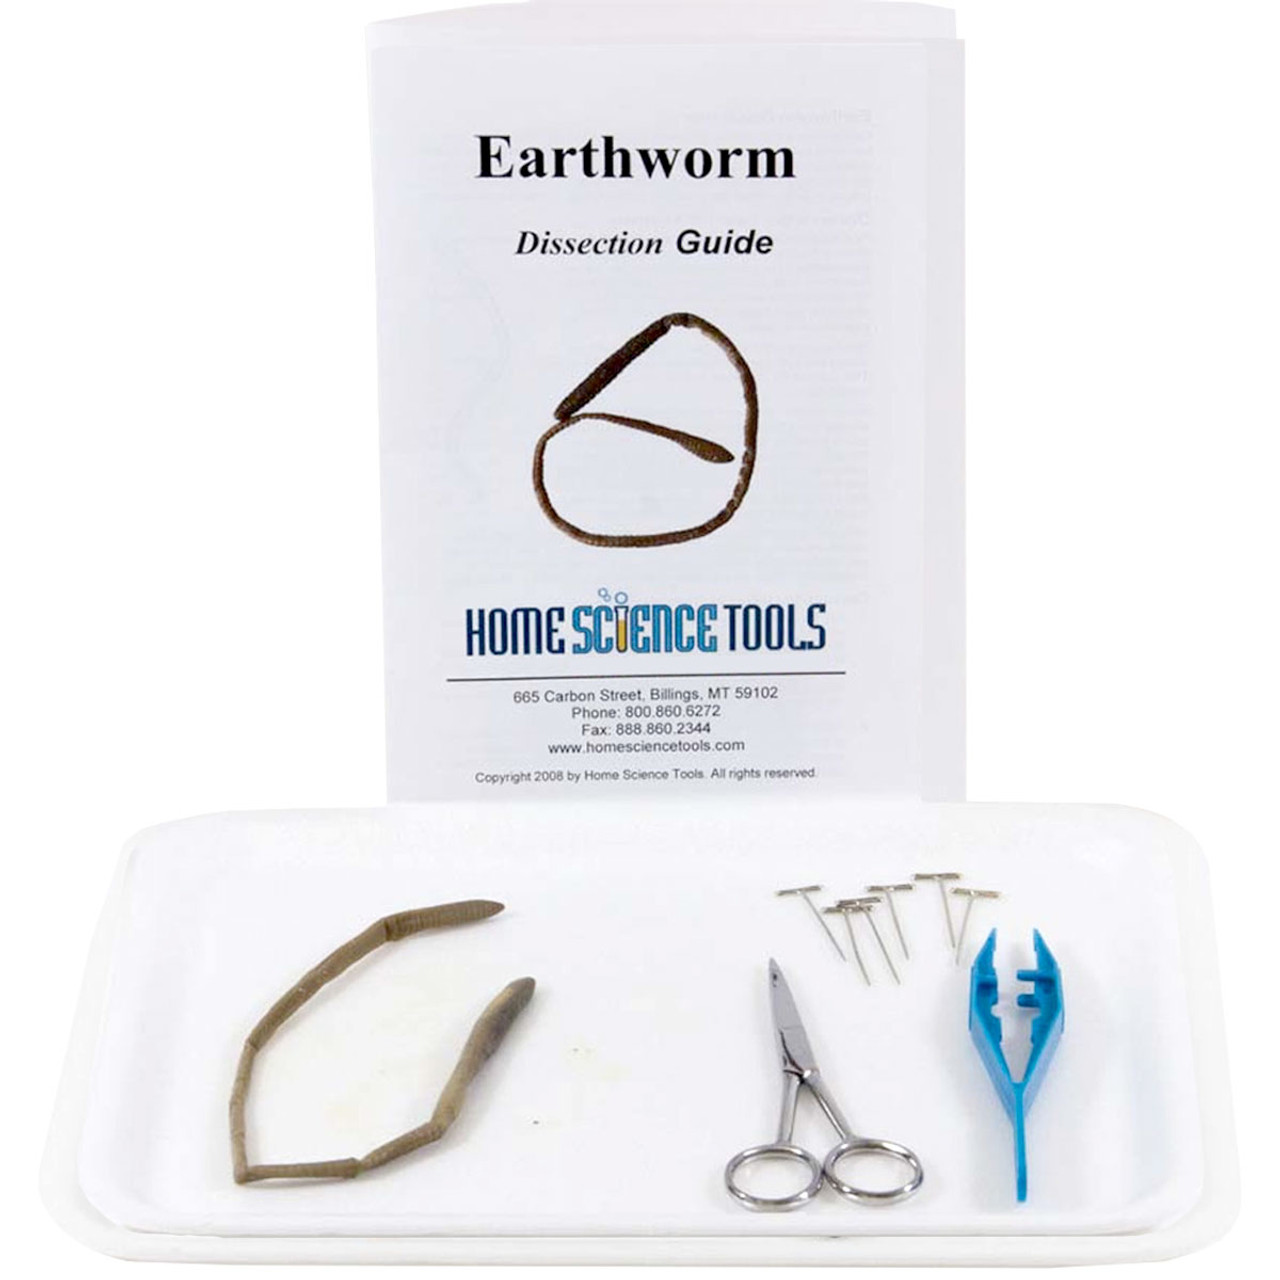 Worm Dissection Science Kit for Biology, Set of 100 Home Science Tools